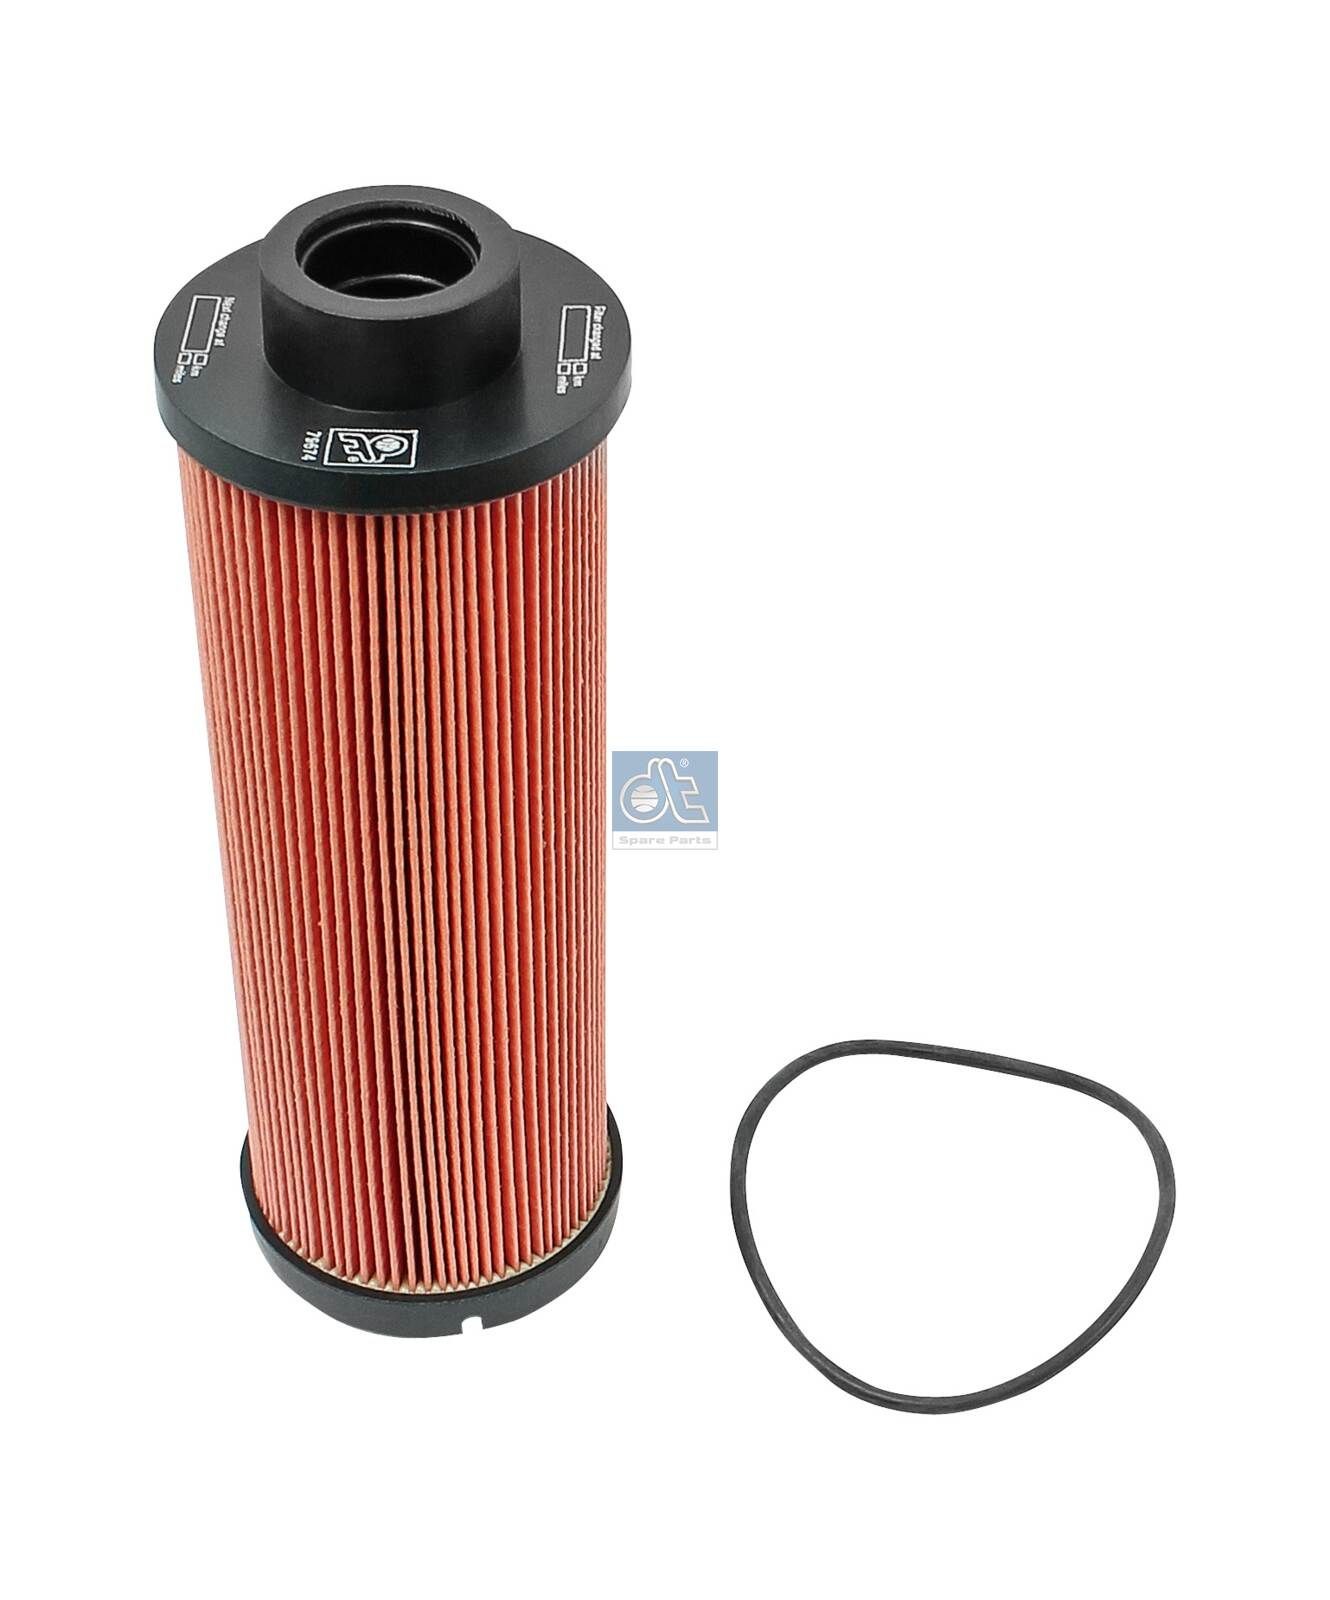 PU 855 x DT Spare Parts 3.22005 Fuel filter 51125030037